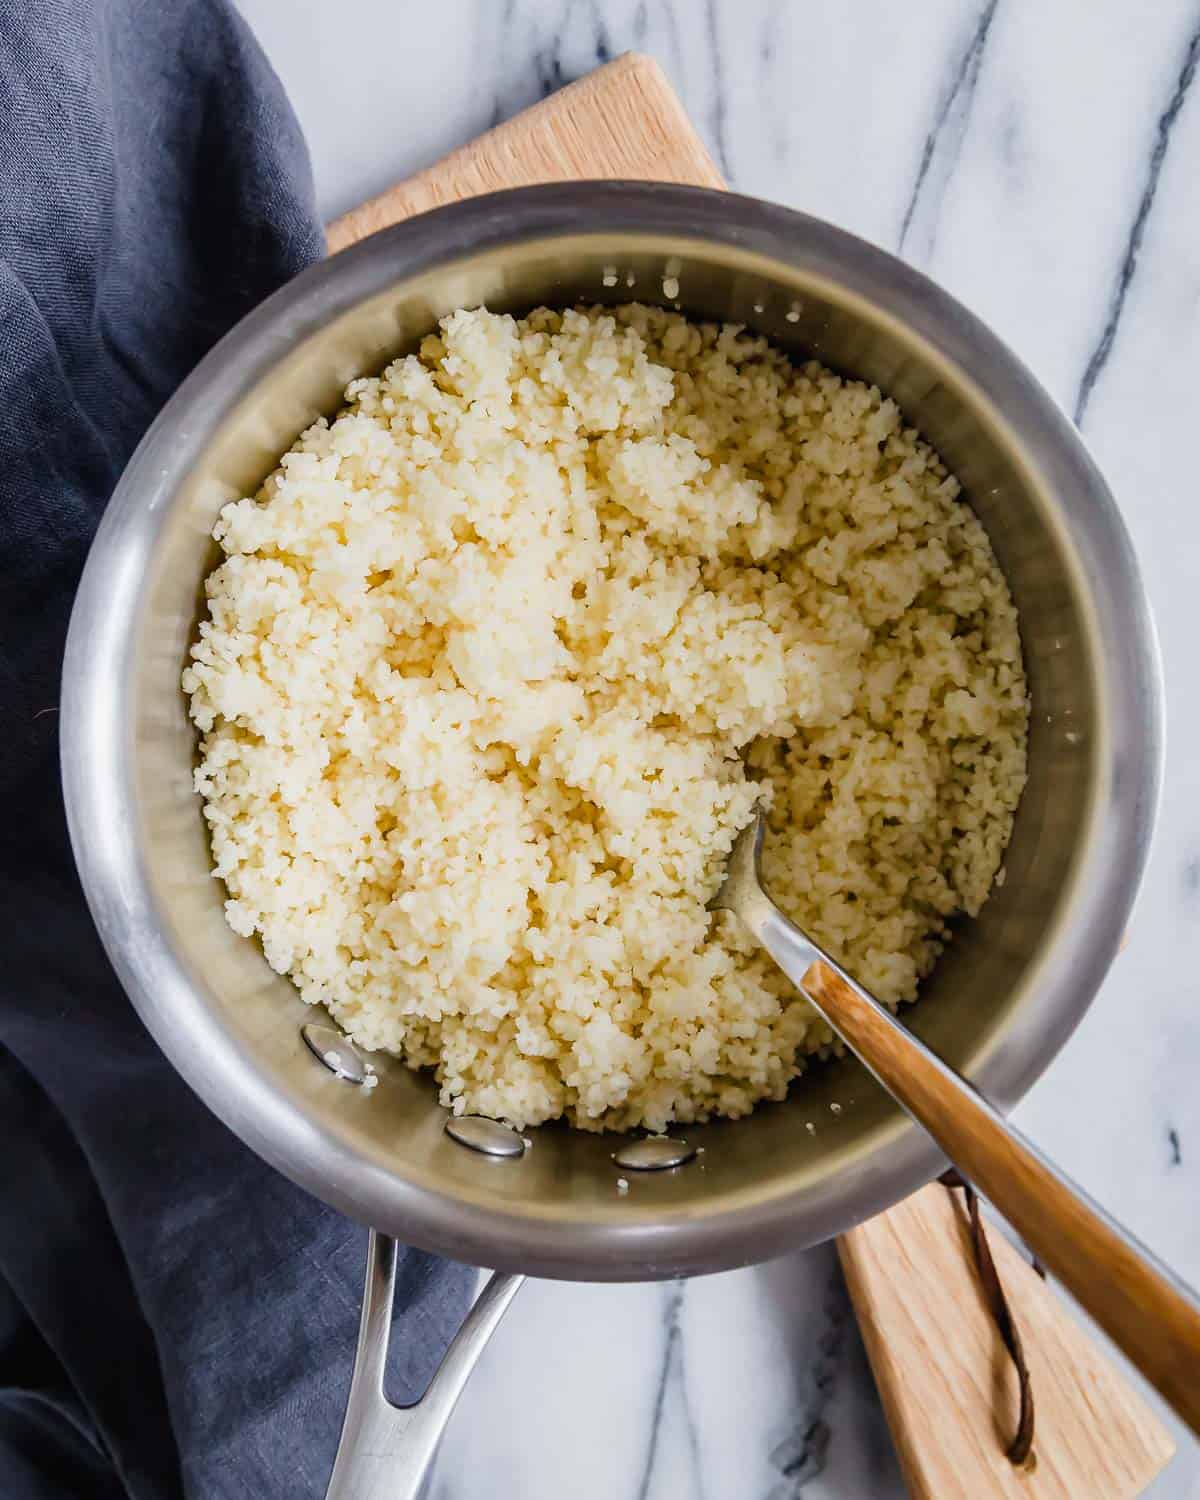 Couscous in a pan fluffed with a fork.